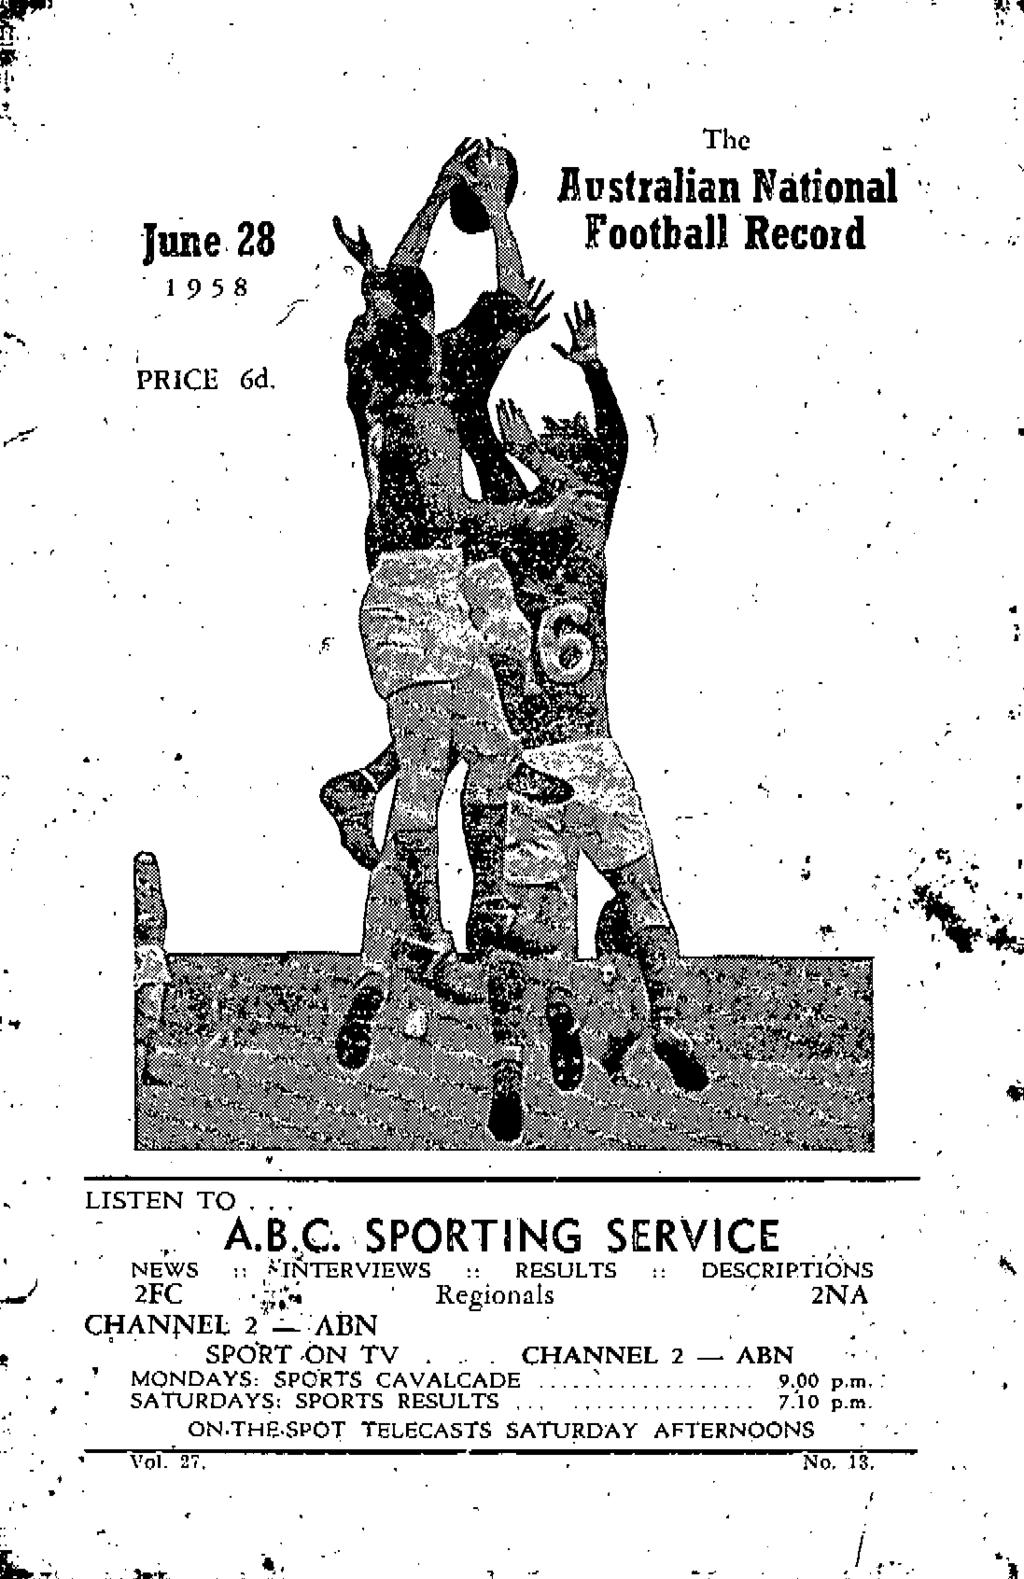 & 1 June 28 The Australian National Football Record 19 5 8 PRICli 6d LISTEN TO,.,, A.B.C. SPORTING SERVICE ' NEWS :: ^TftTERVIEWS :: RESULTS DESCRIPTIONS 2FC Regionals ' 2NA CHANNEL 2 ABN SPORT ON TV.